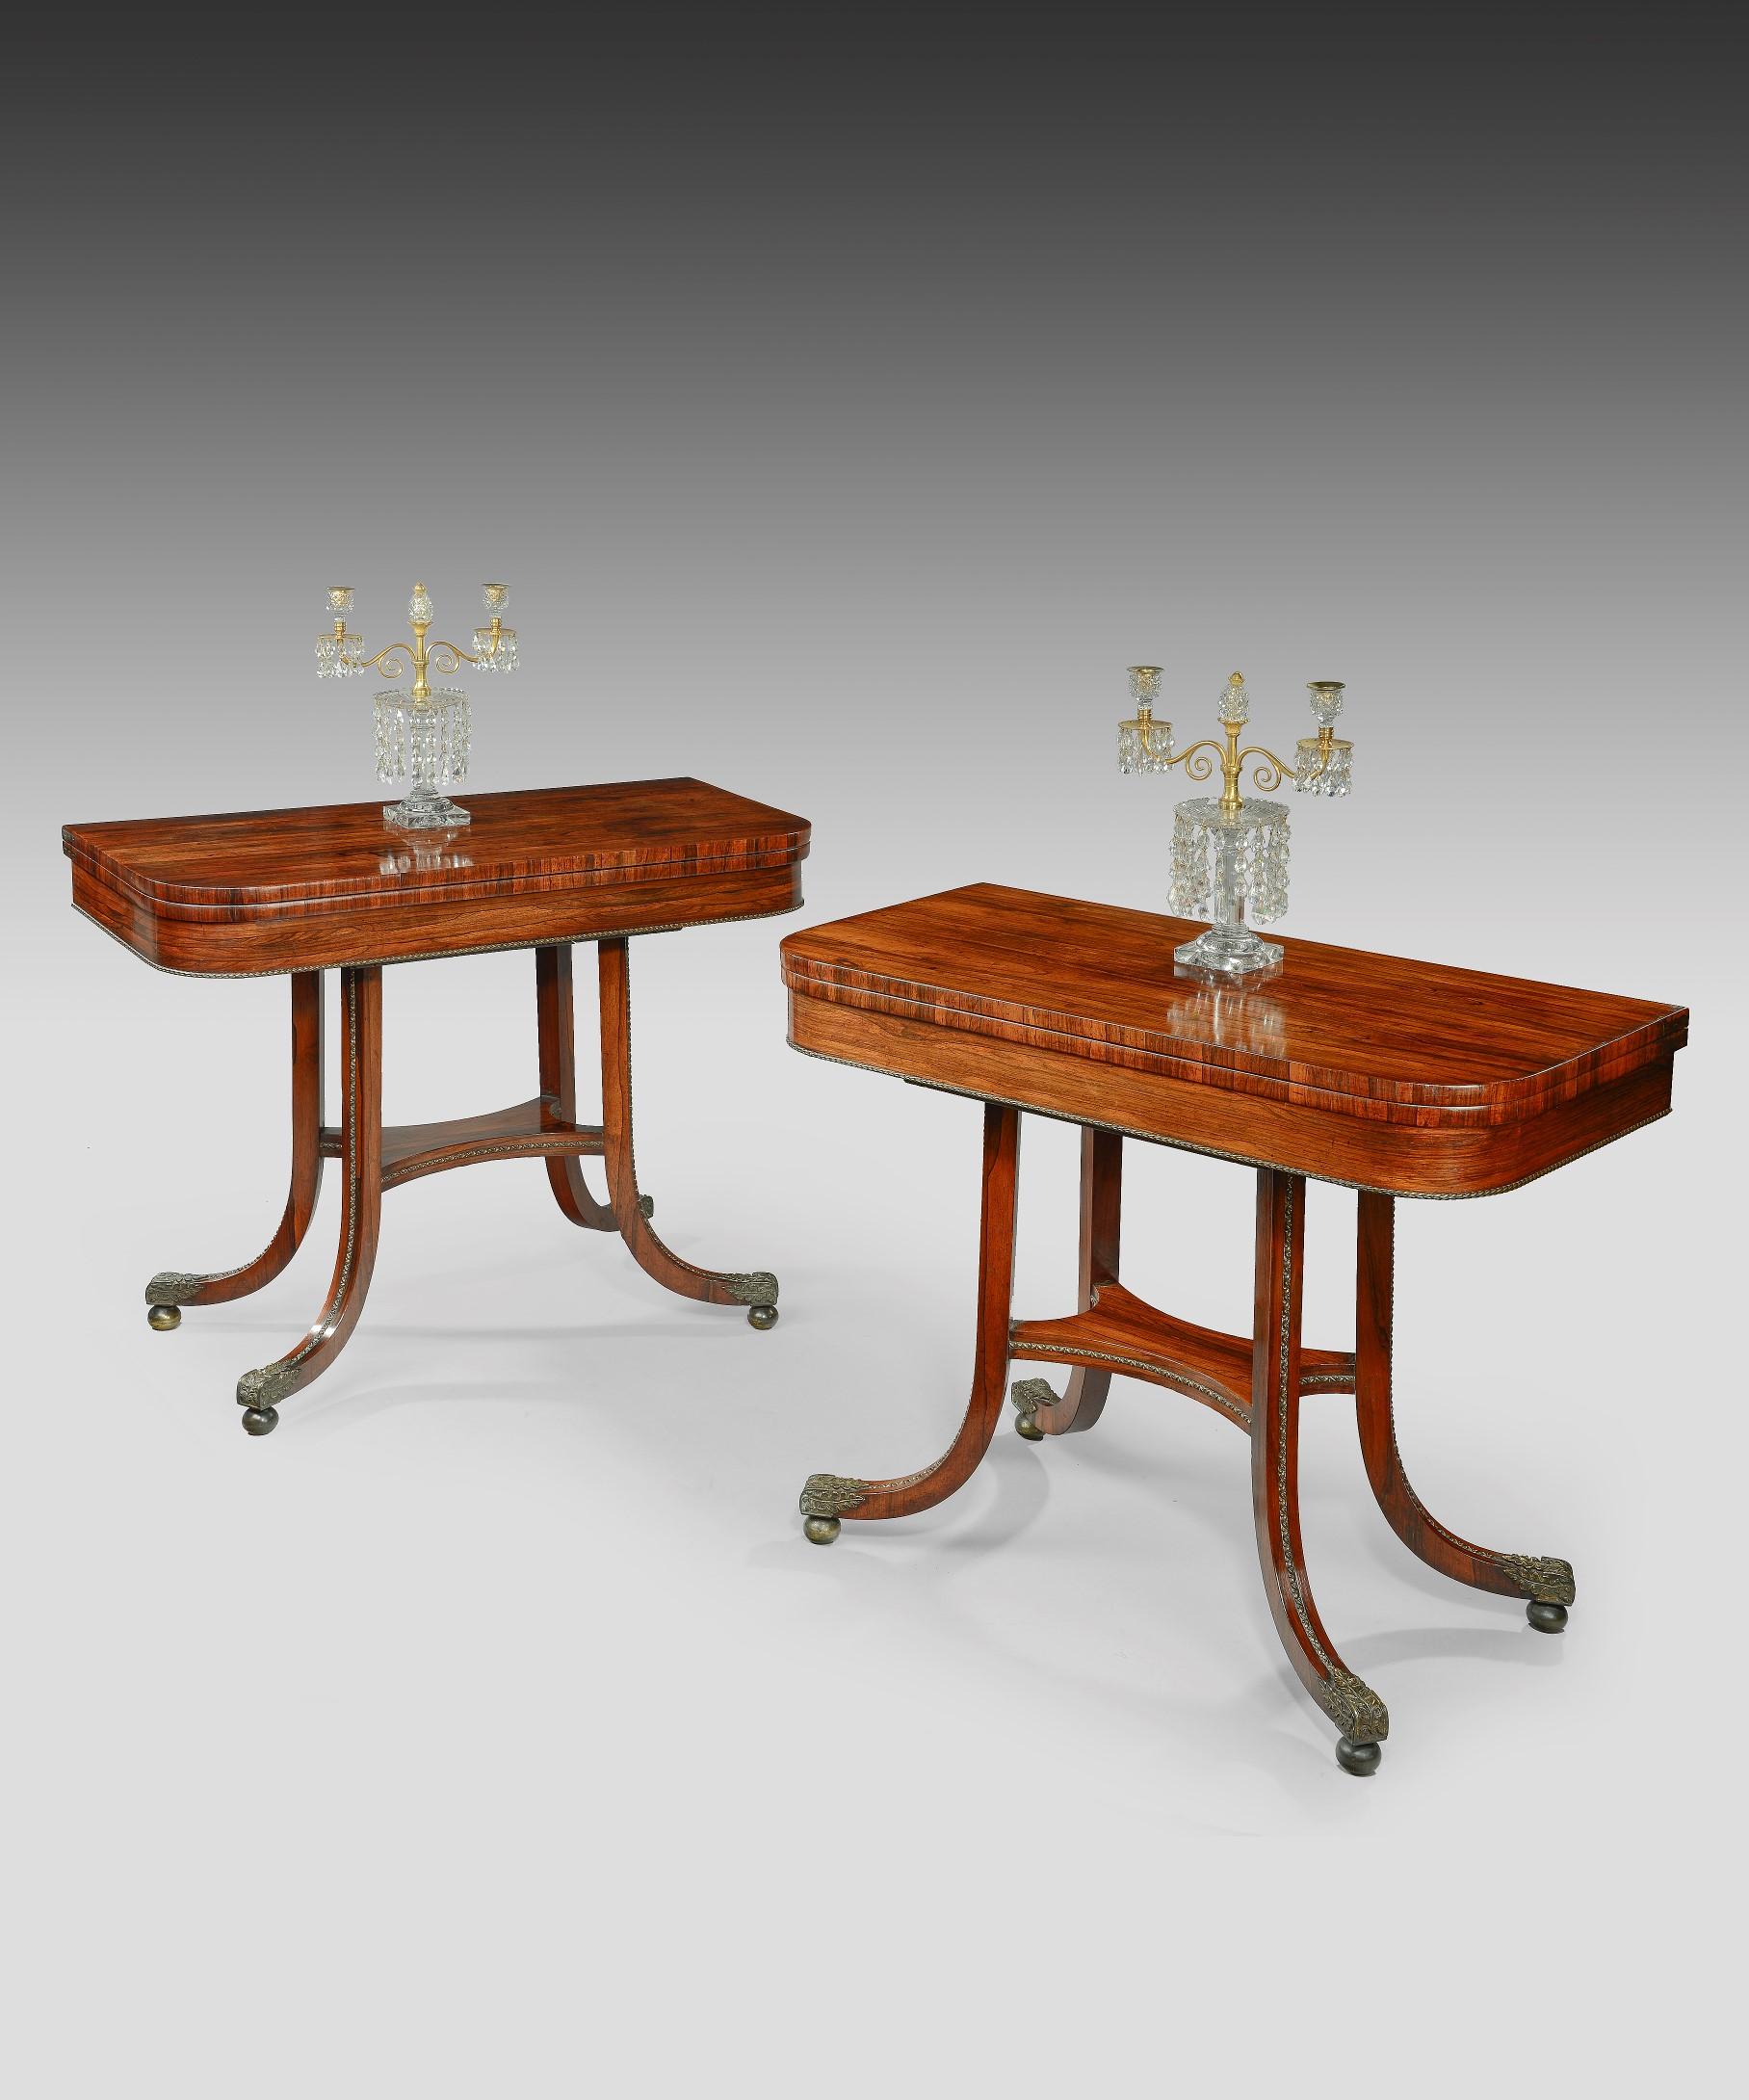 A handsome pair of Regency period rosewood veneered card tables; the card tables' well figured tops rotate and open to reveal a baize covered playing surface, raised on hockey stick legs which are decorated with ormolu and terminate in unusual oak